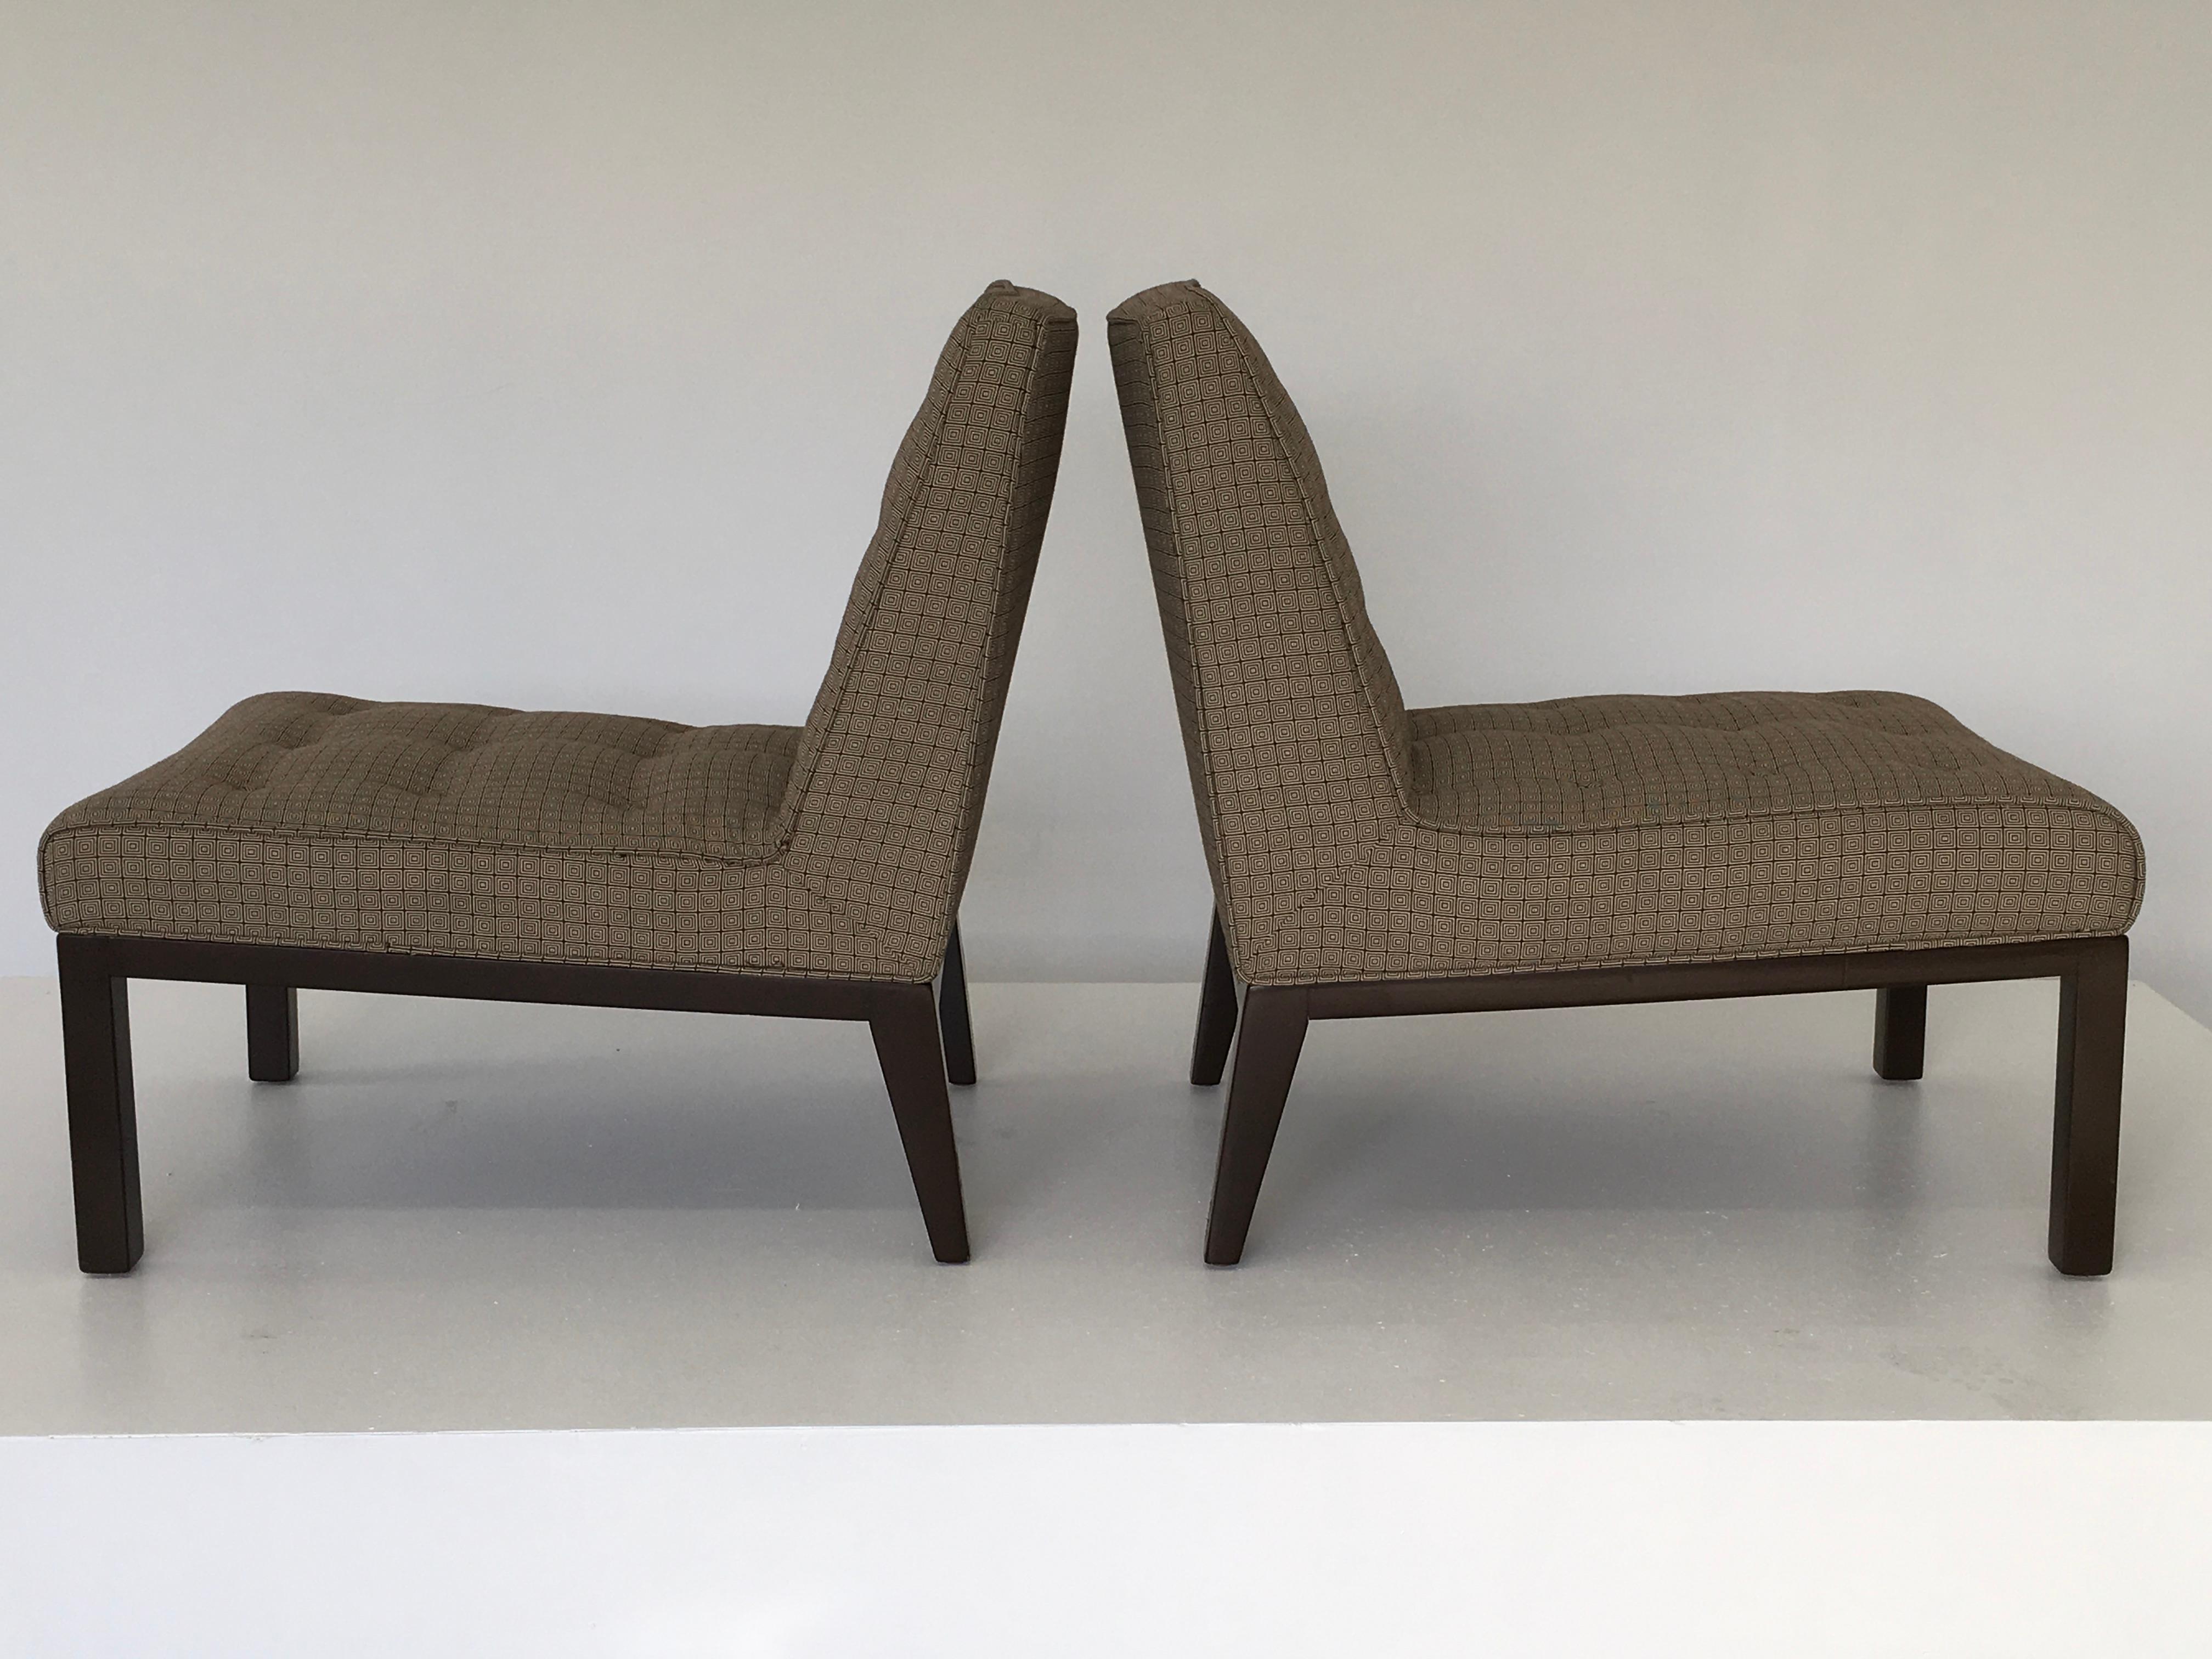 20th Century Edward Wormley for Dunbar Slipper Chairs For Sale